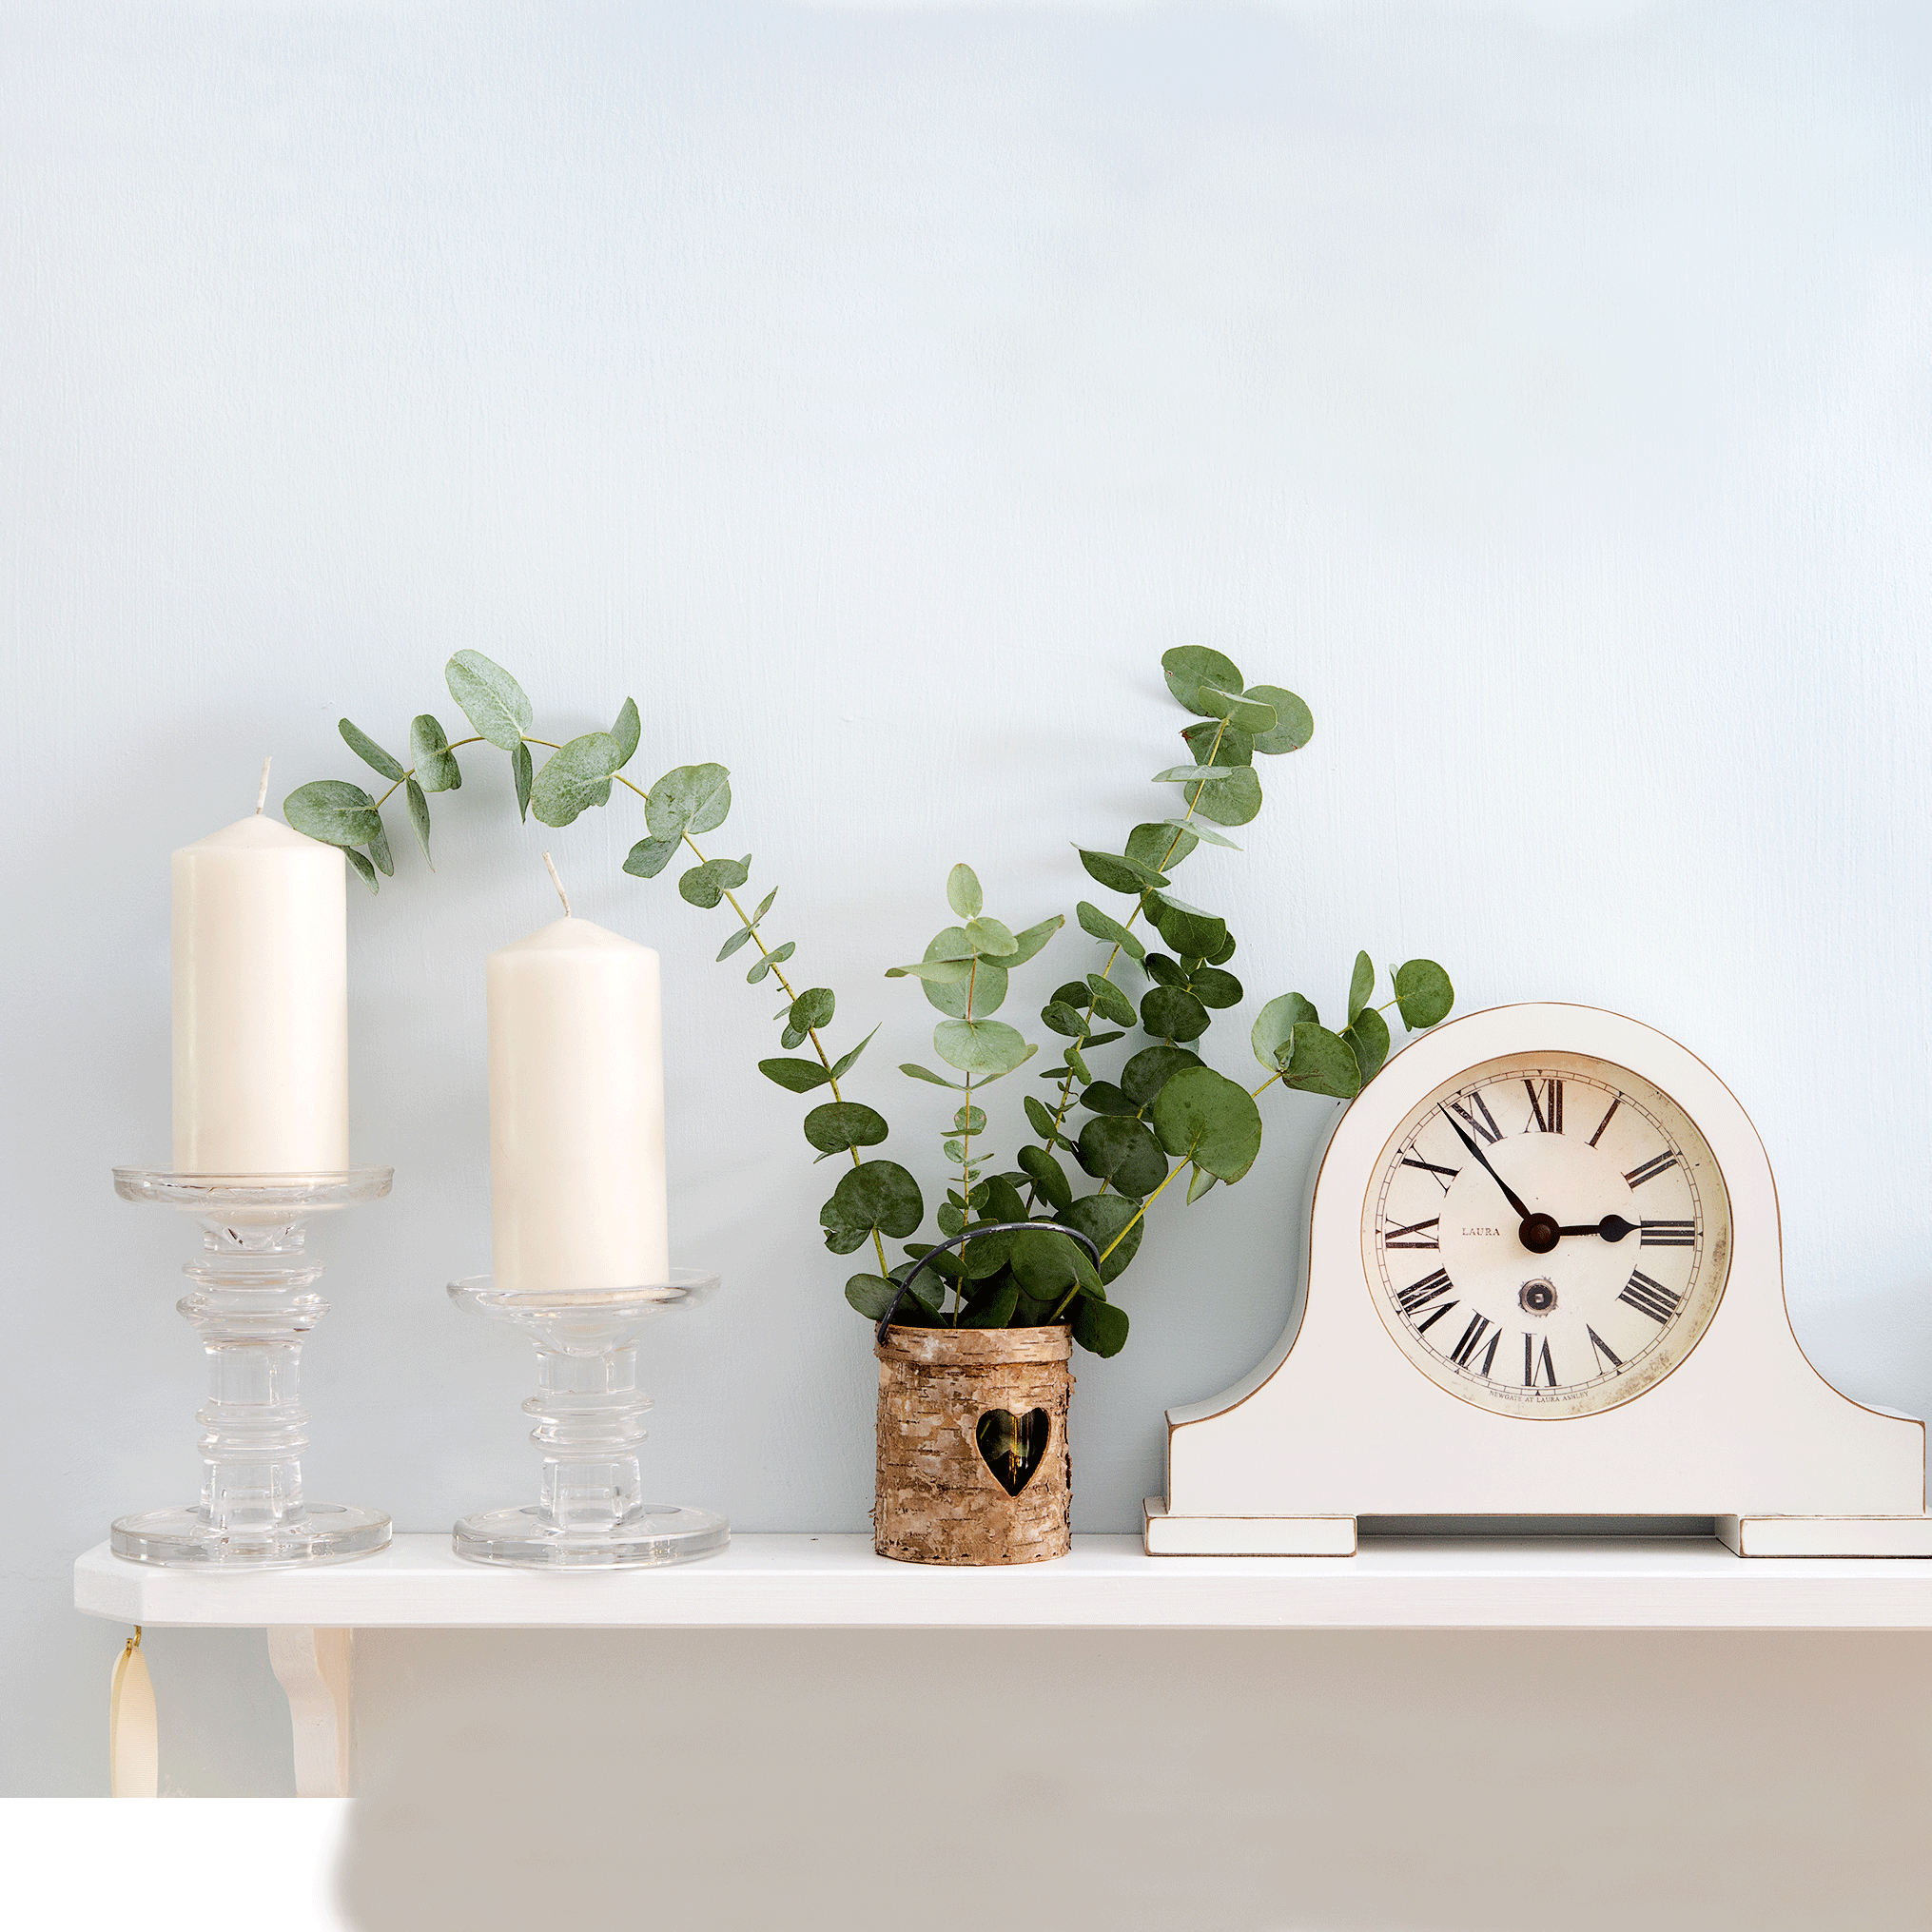 A white shelf supporting a pair of candles, a green leafy plant in a wooden pot, and a white analogue clock.